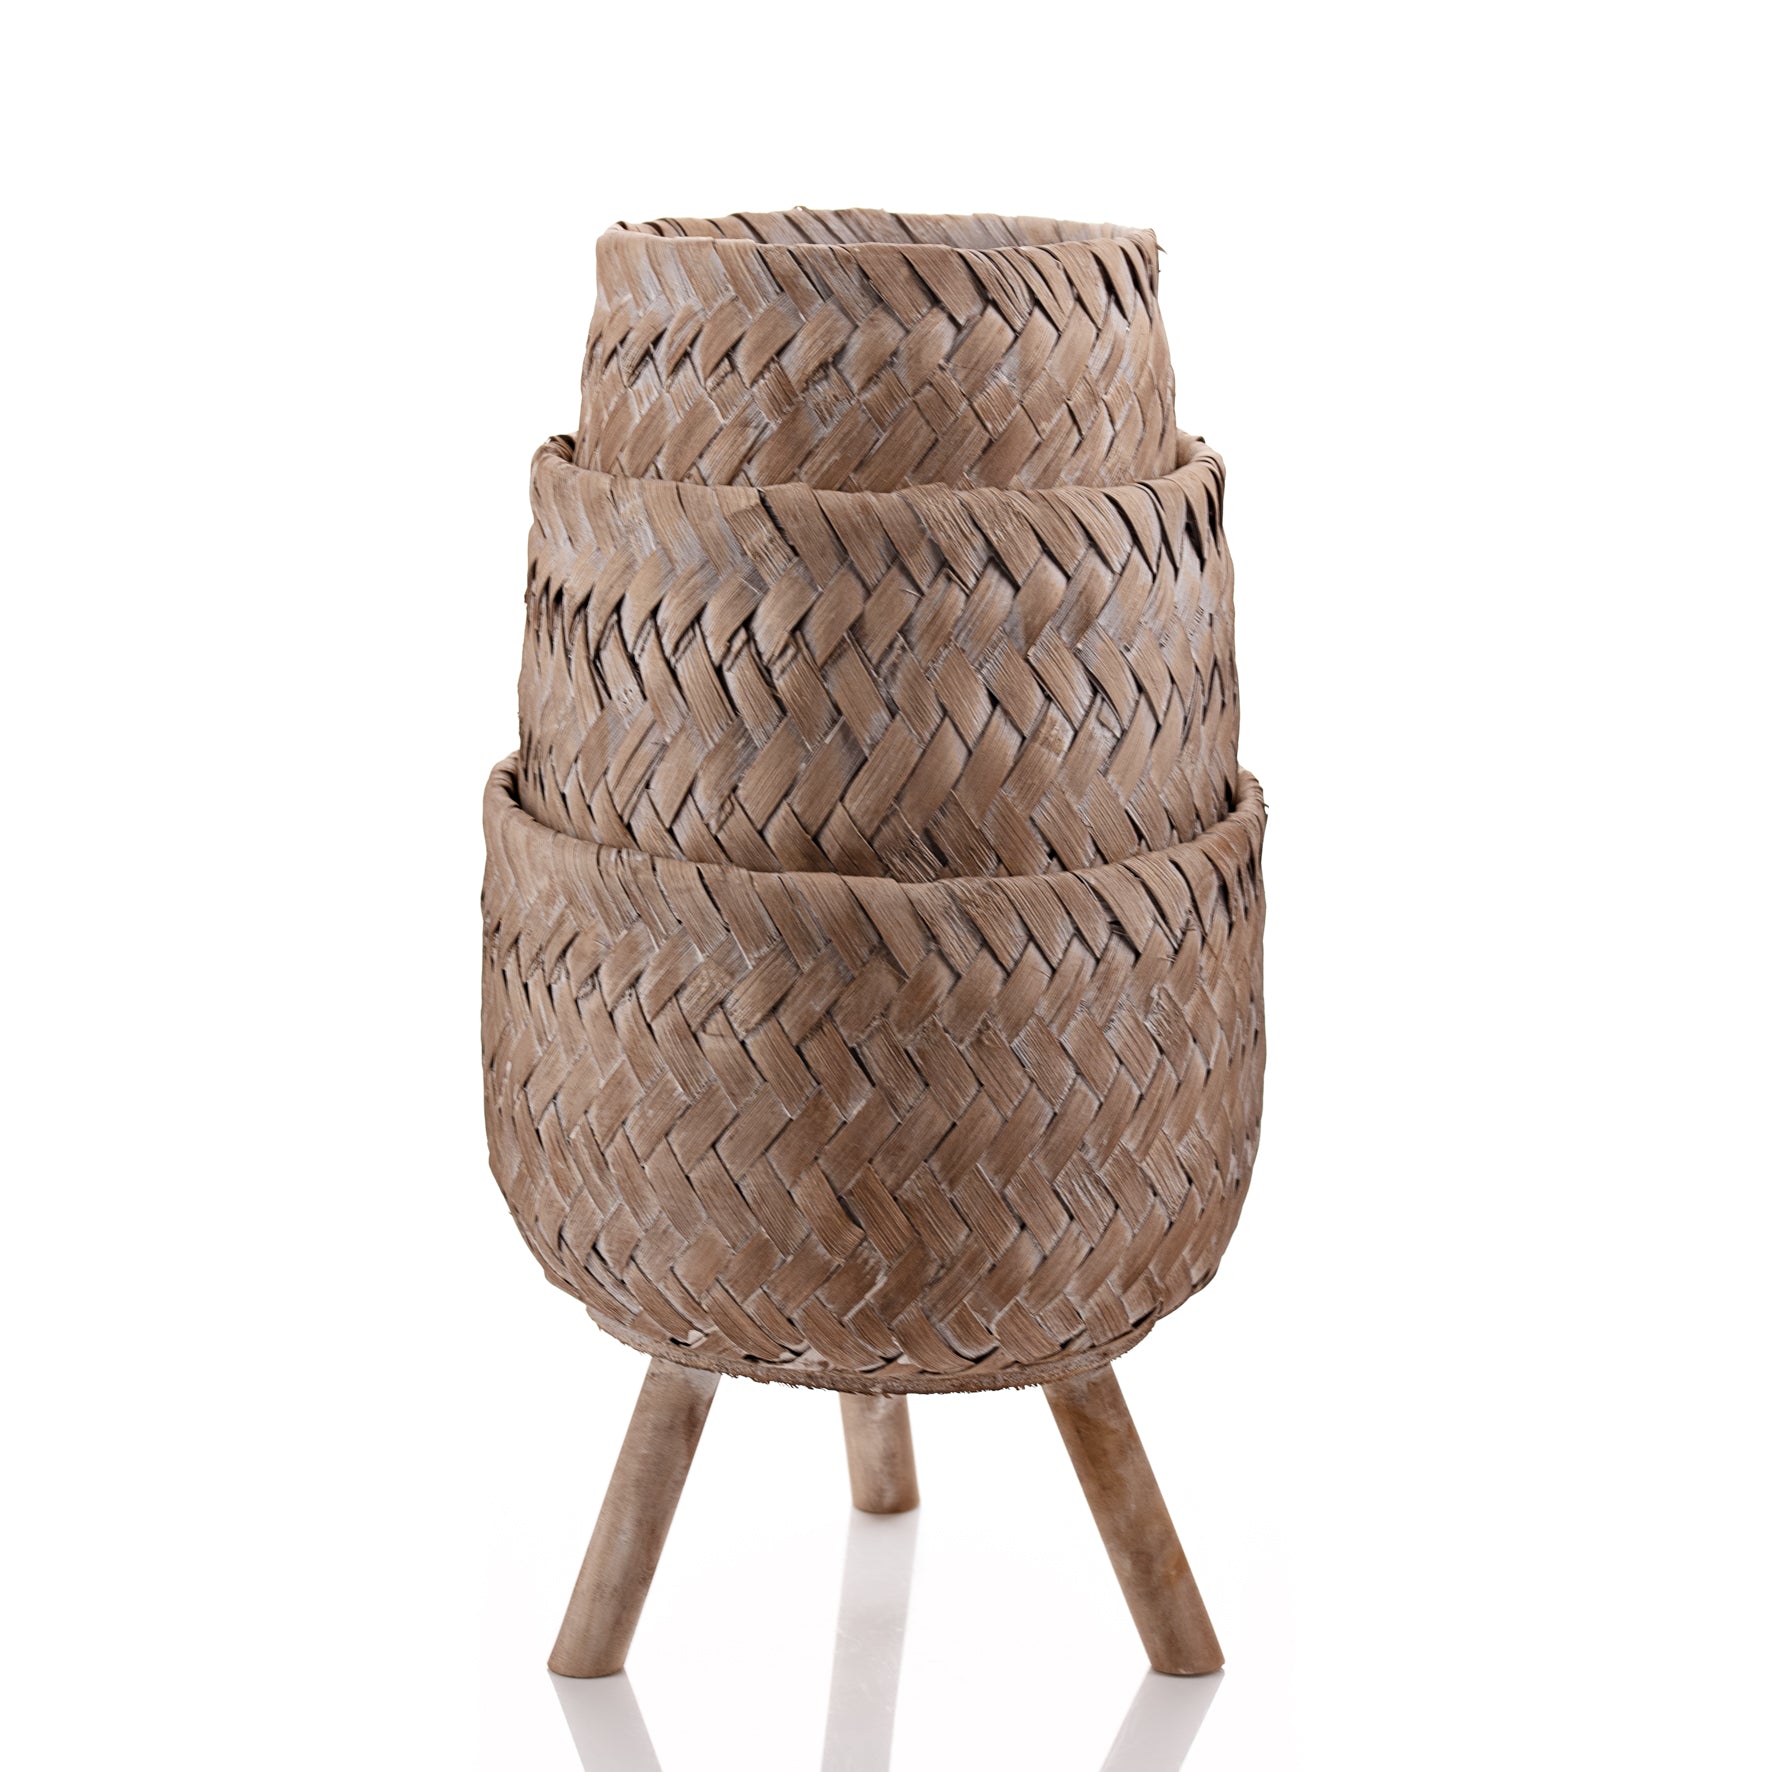 Set of 3 Woven Bamboo Indoor Footed Planters